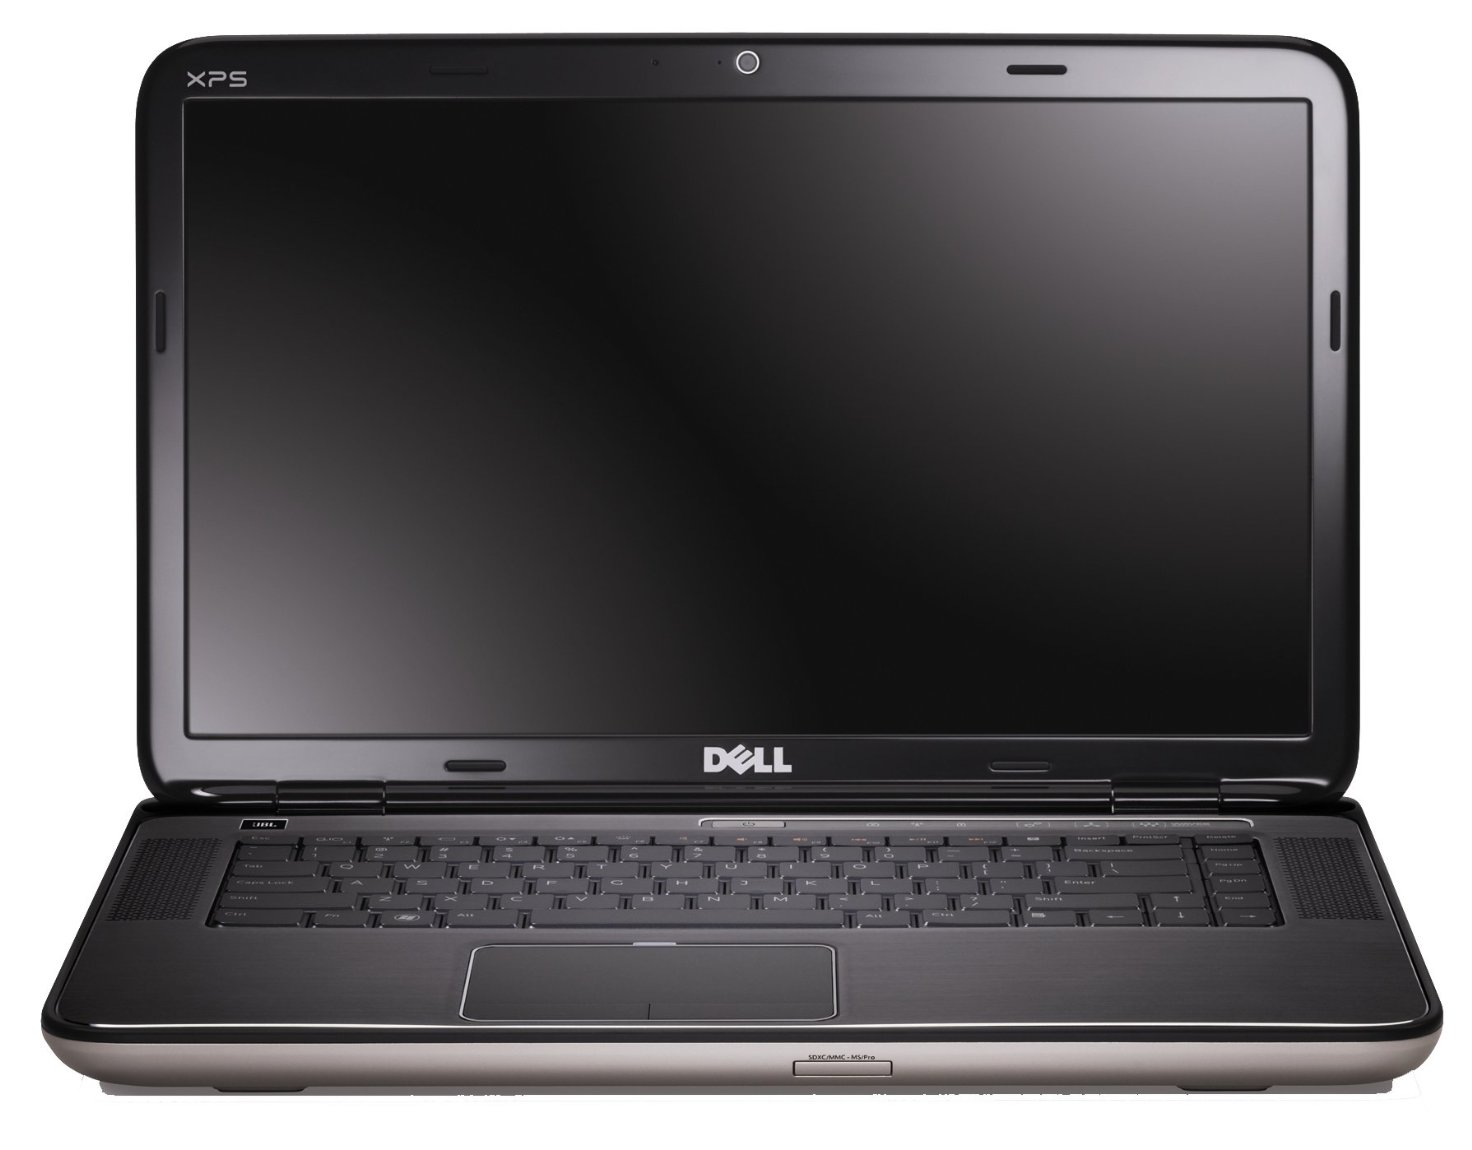   Dell XPS 15 (7590-6688)  1